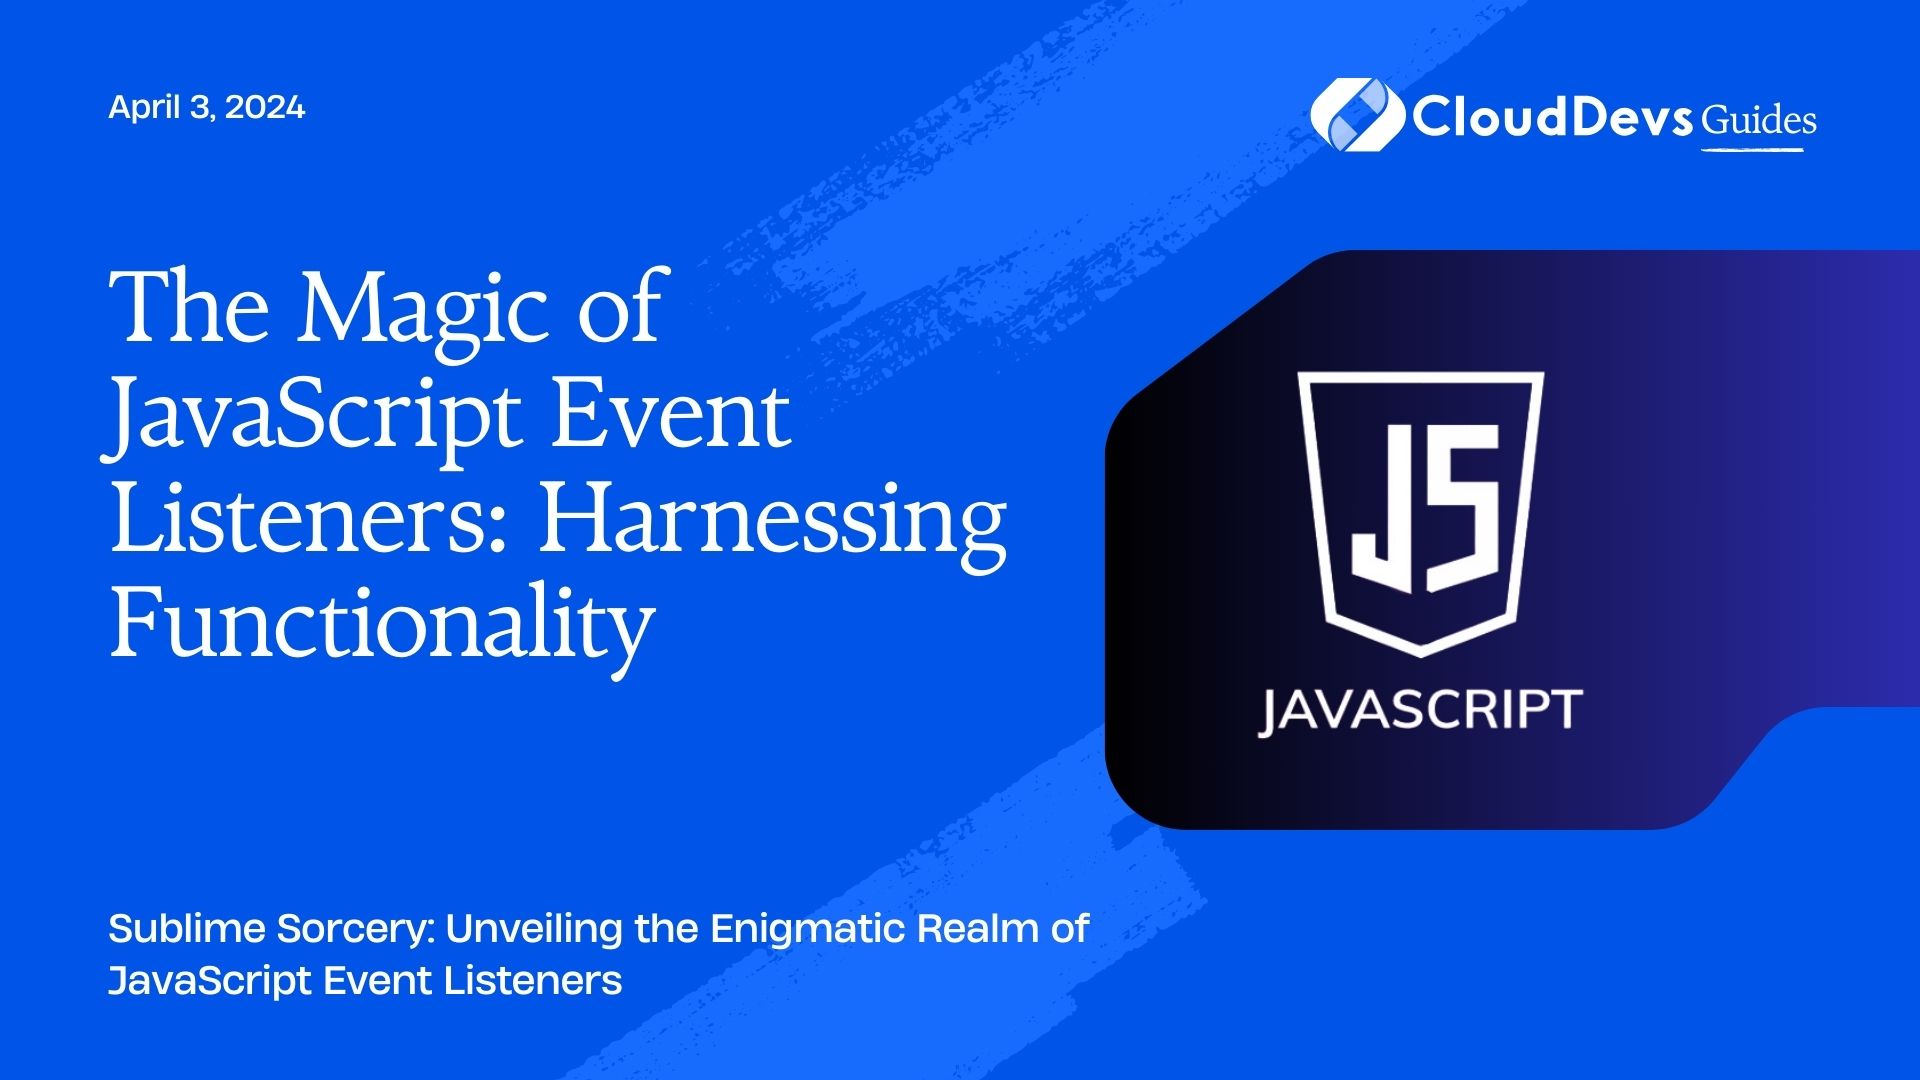 The Magic of JavaScript Event Listeners: Harnessing Functionality